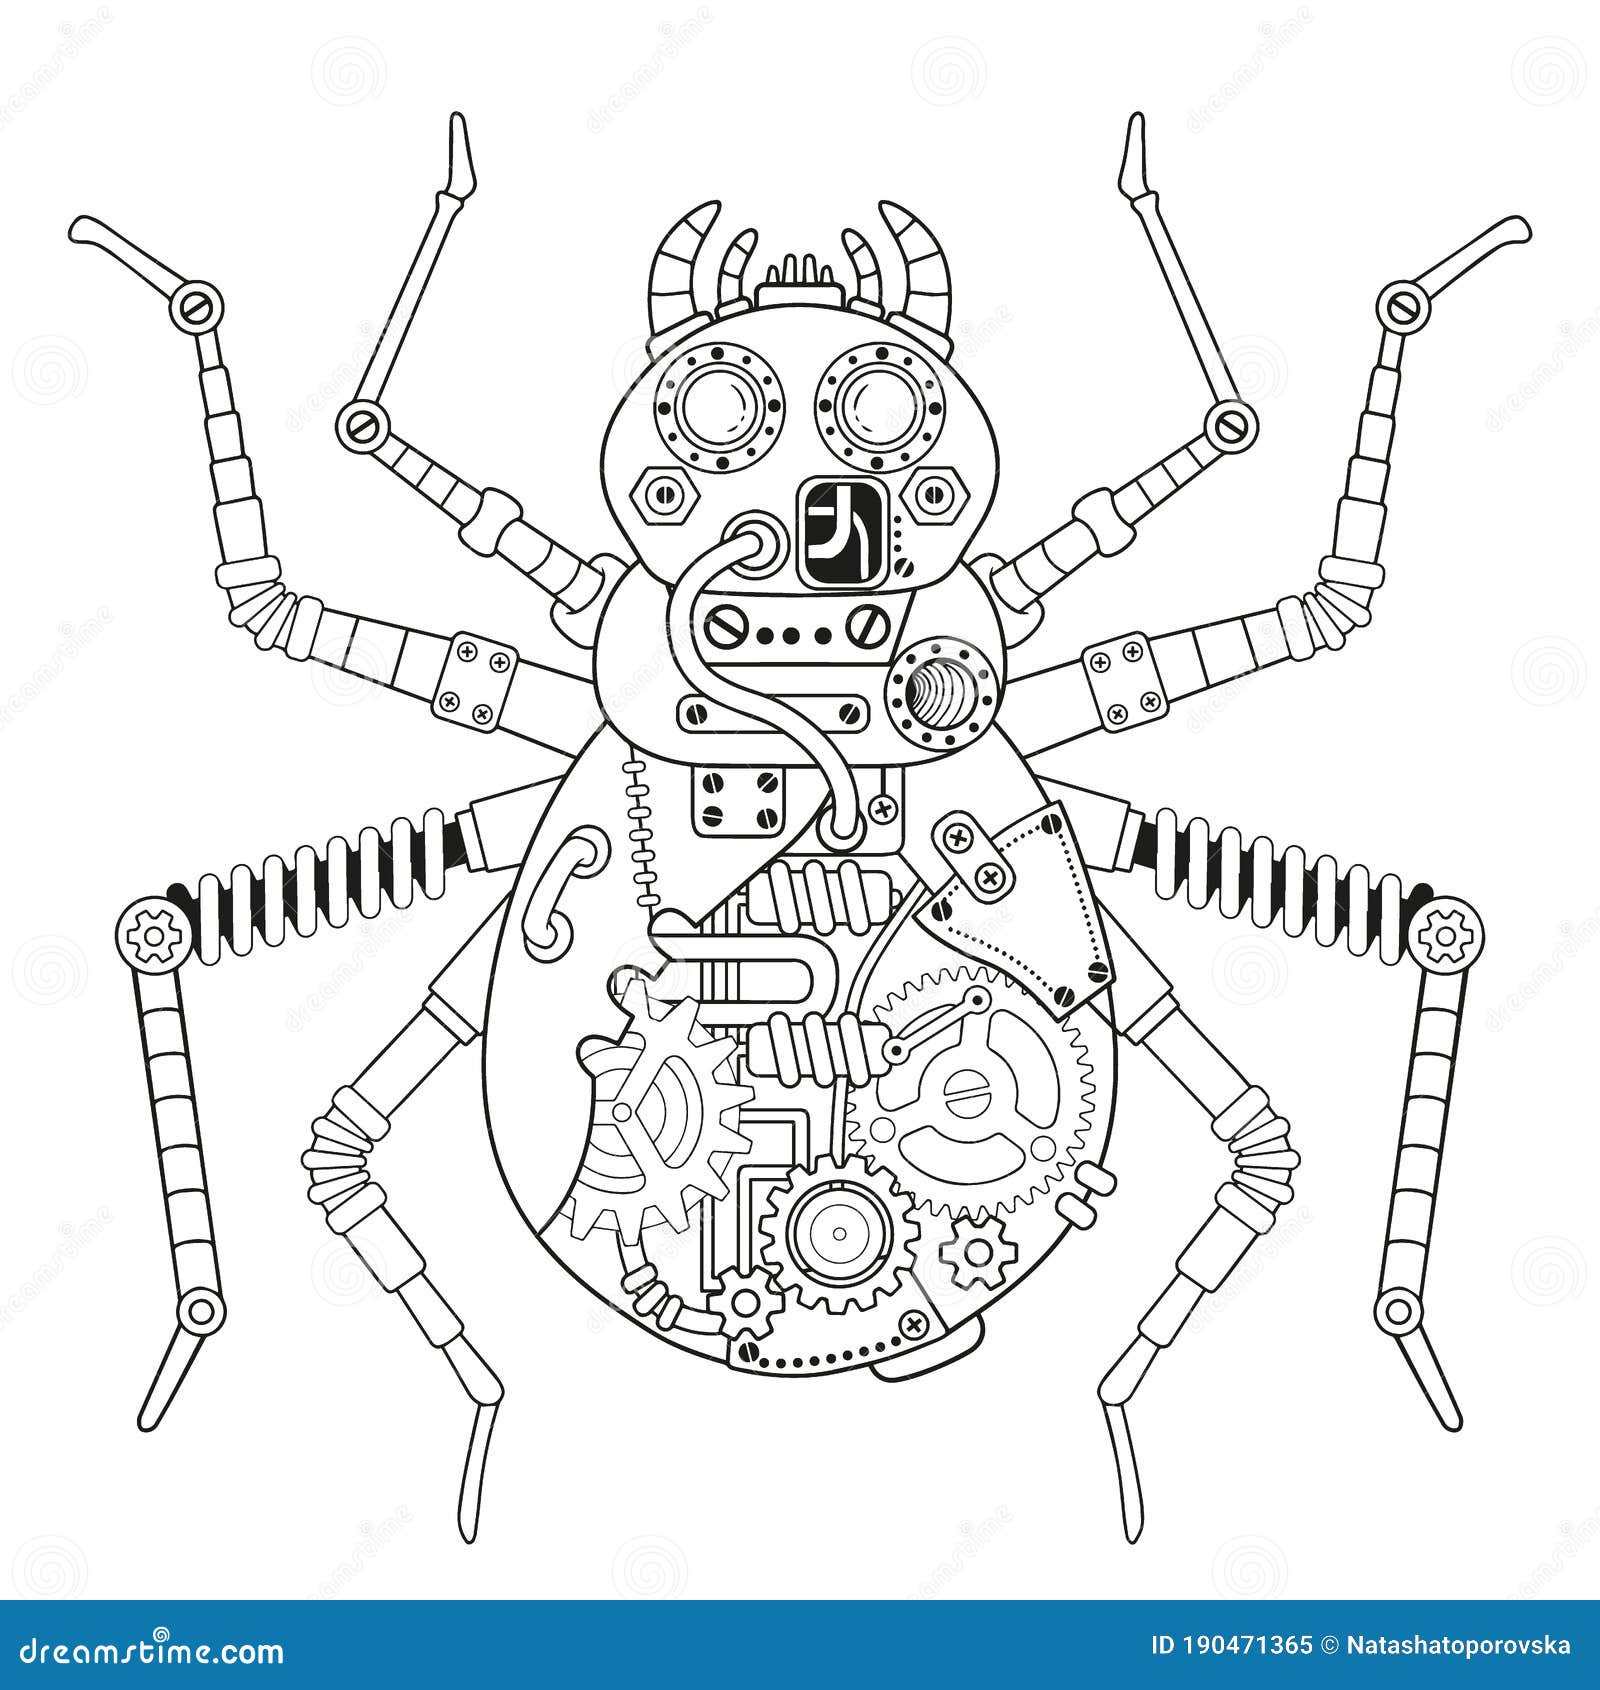 Steampunk Vector Coloring Page Vector Coloring Book For Adult For Relax And Medetation Art Design Of A Fictional Stock Vector Illustration Of Robot Decoration 190471365